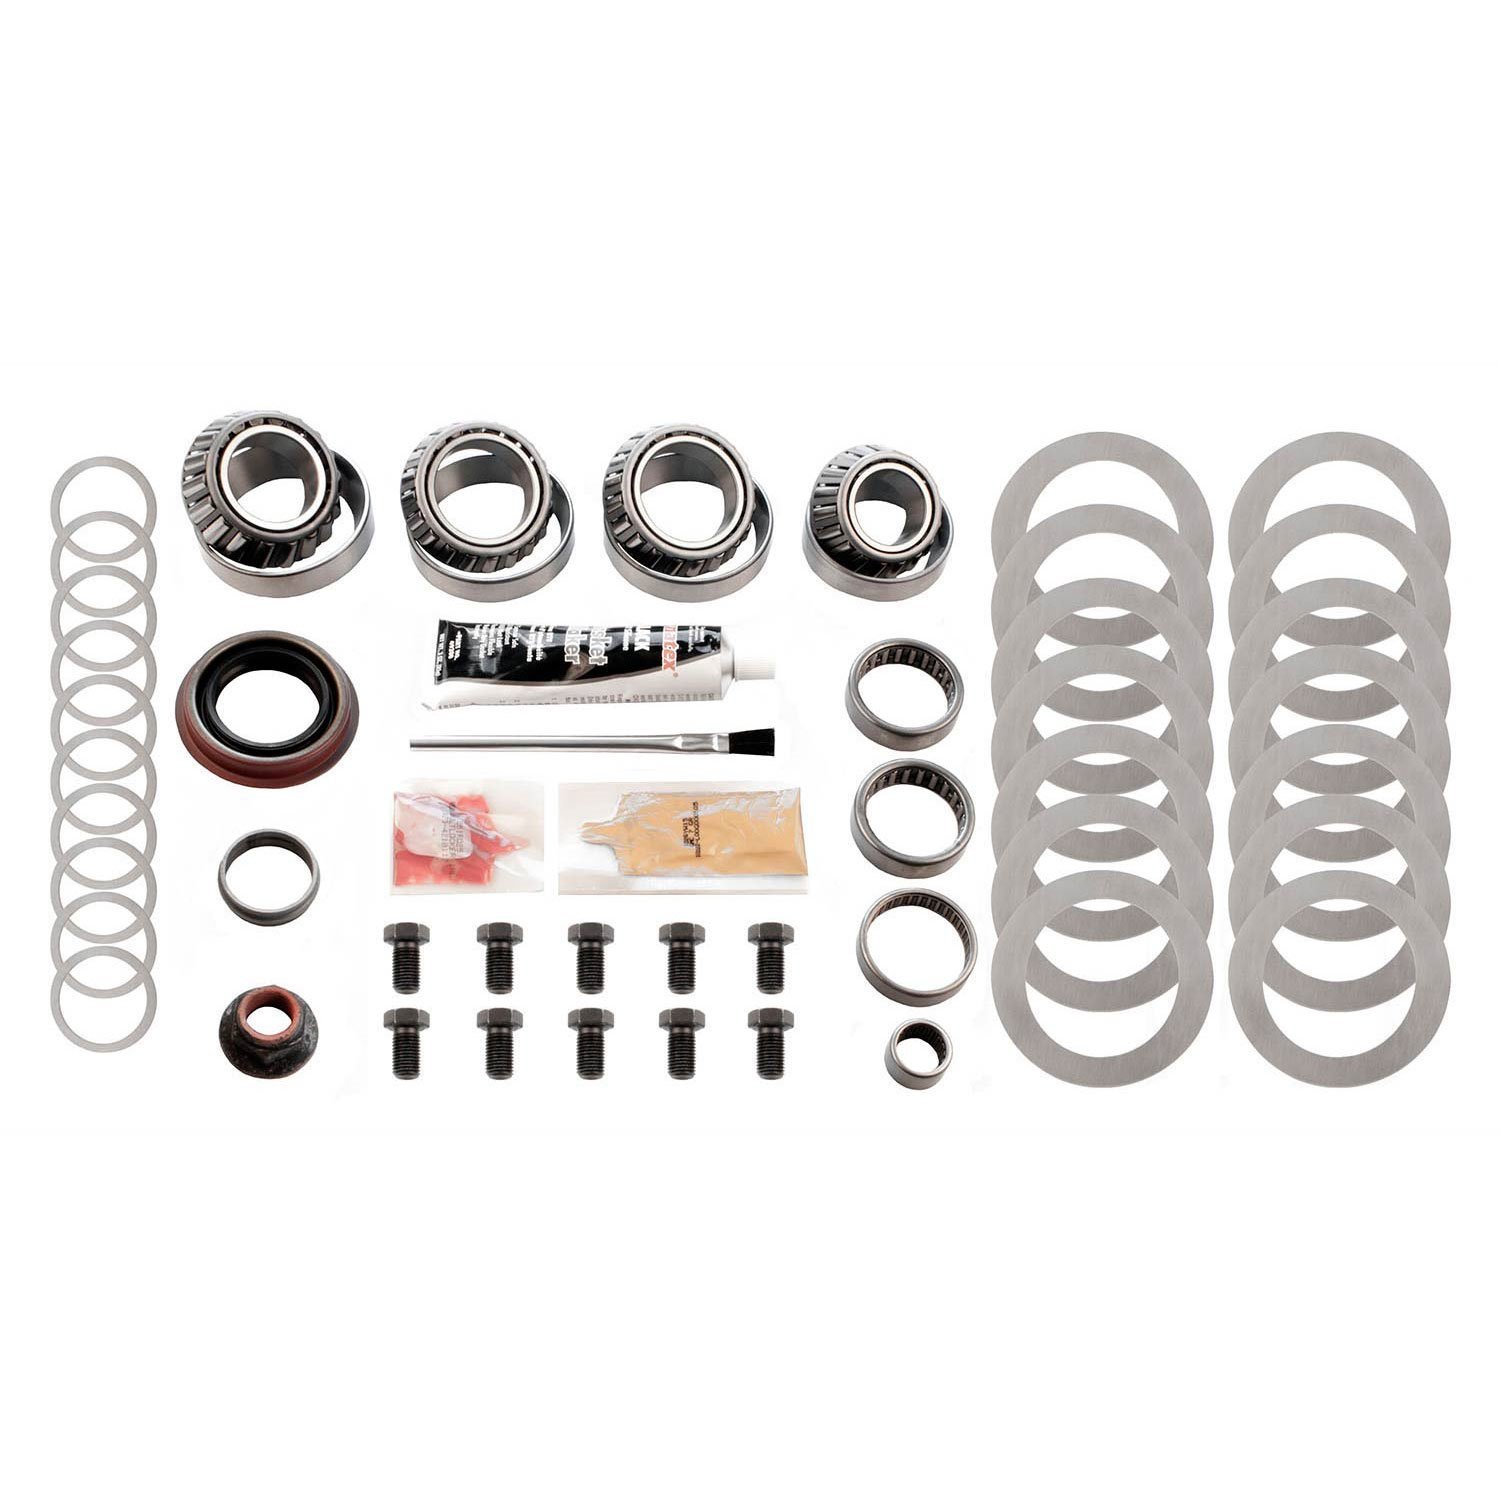 Master Installation Kit Ford 8.8" IFS Includes: